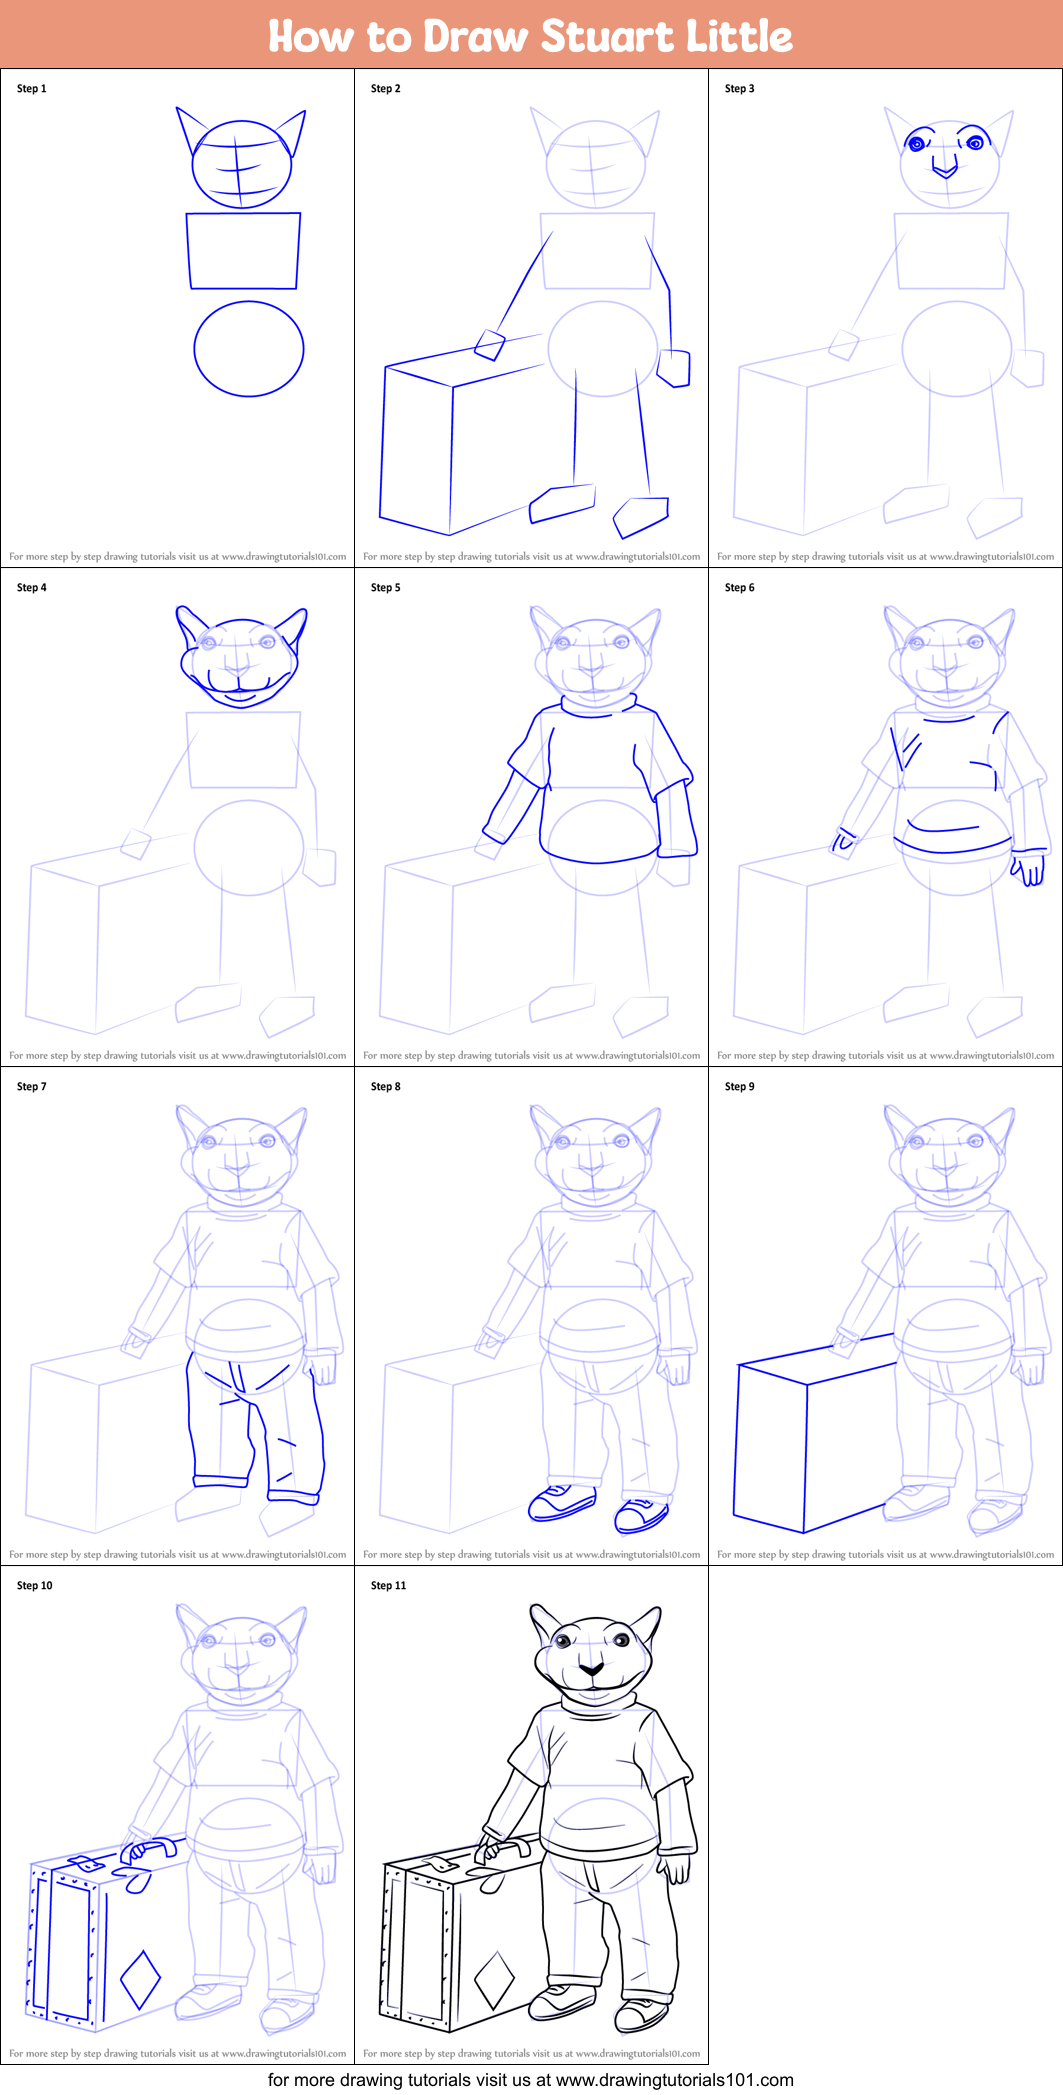 How to Draw Stuart Little printable step by step drawing sheet